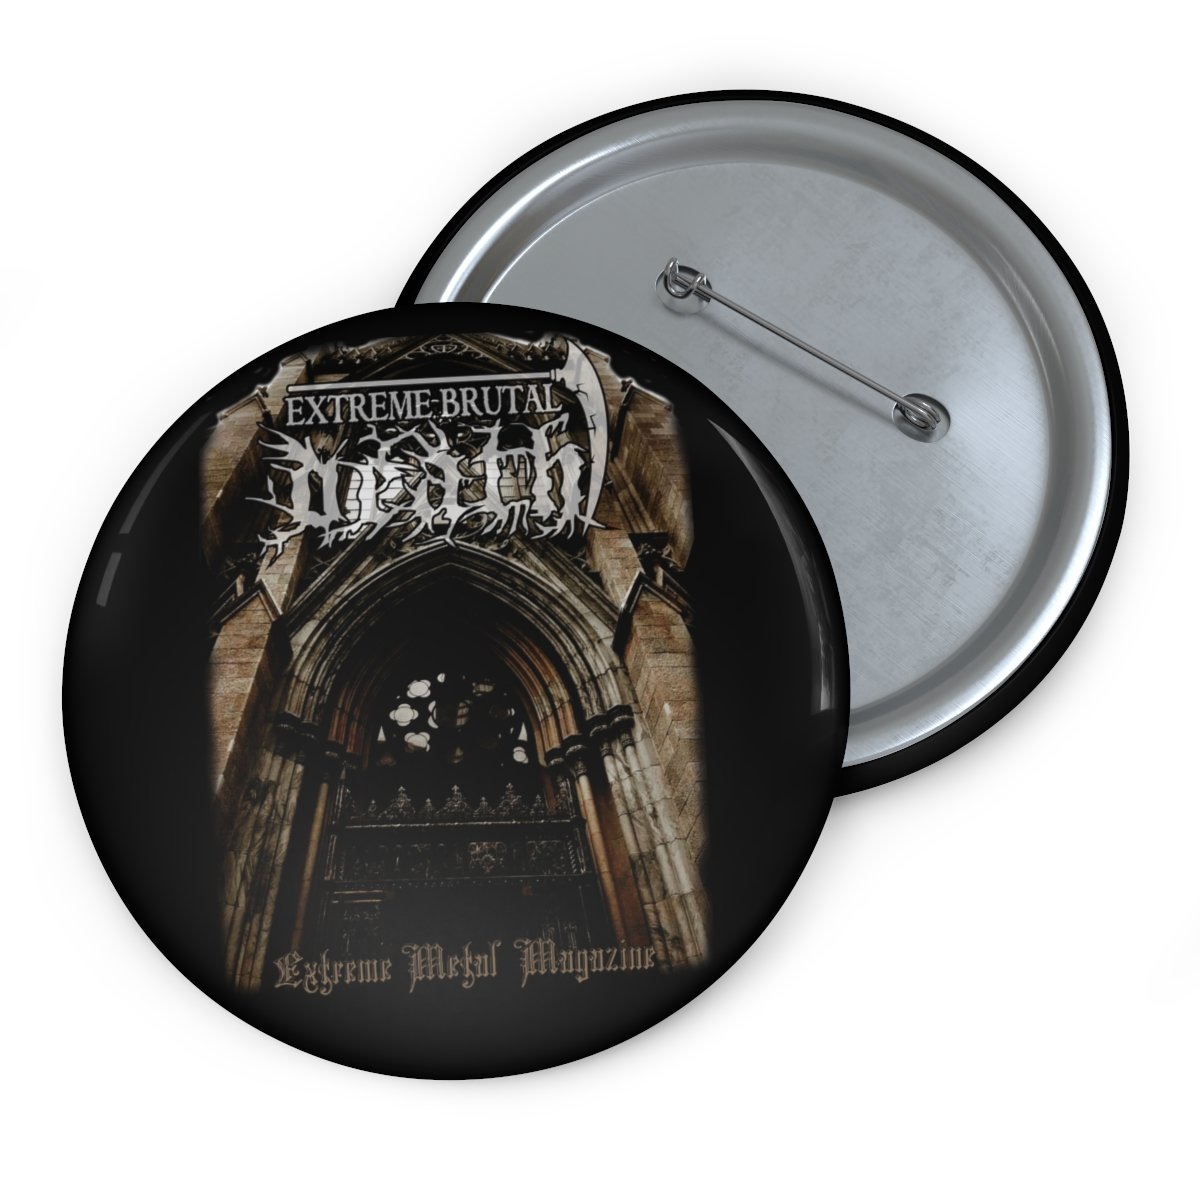 Extreme Brutal Death Metal Magazine Pin Buttons